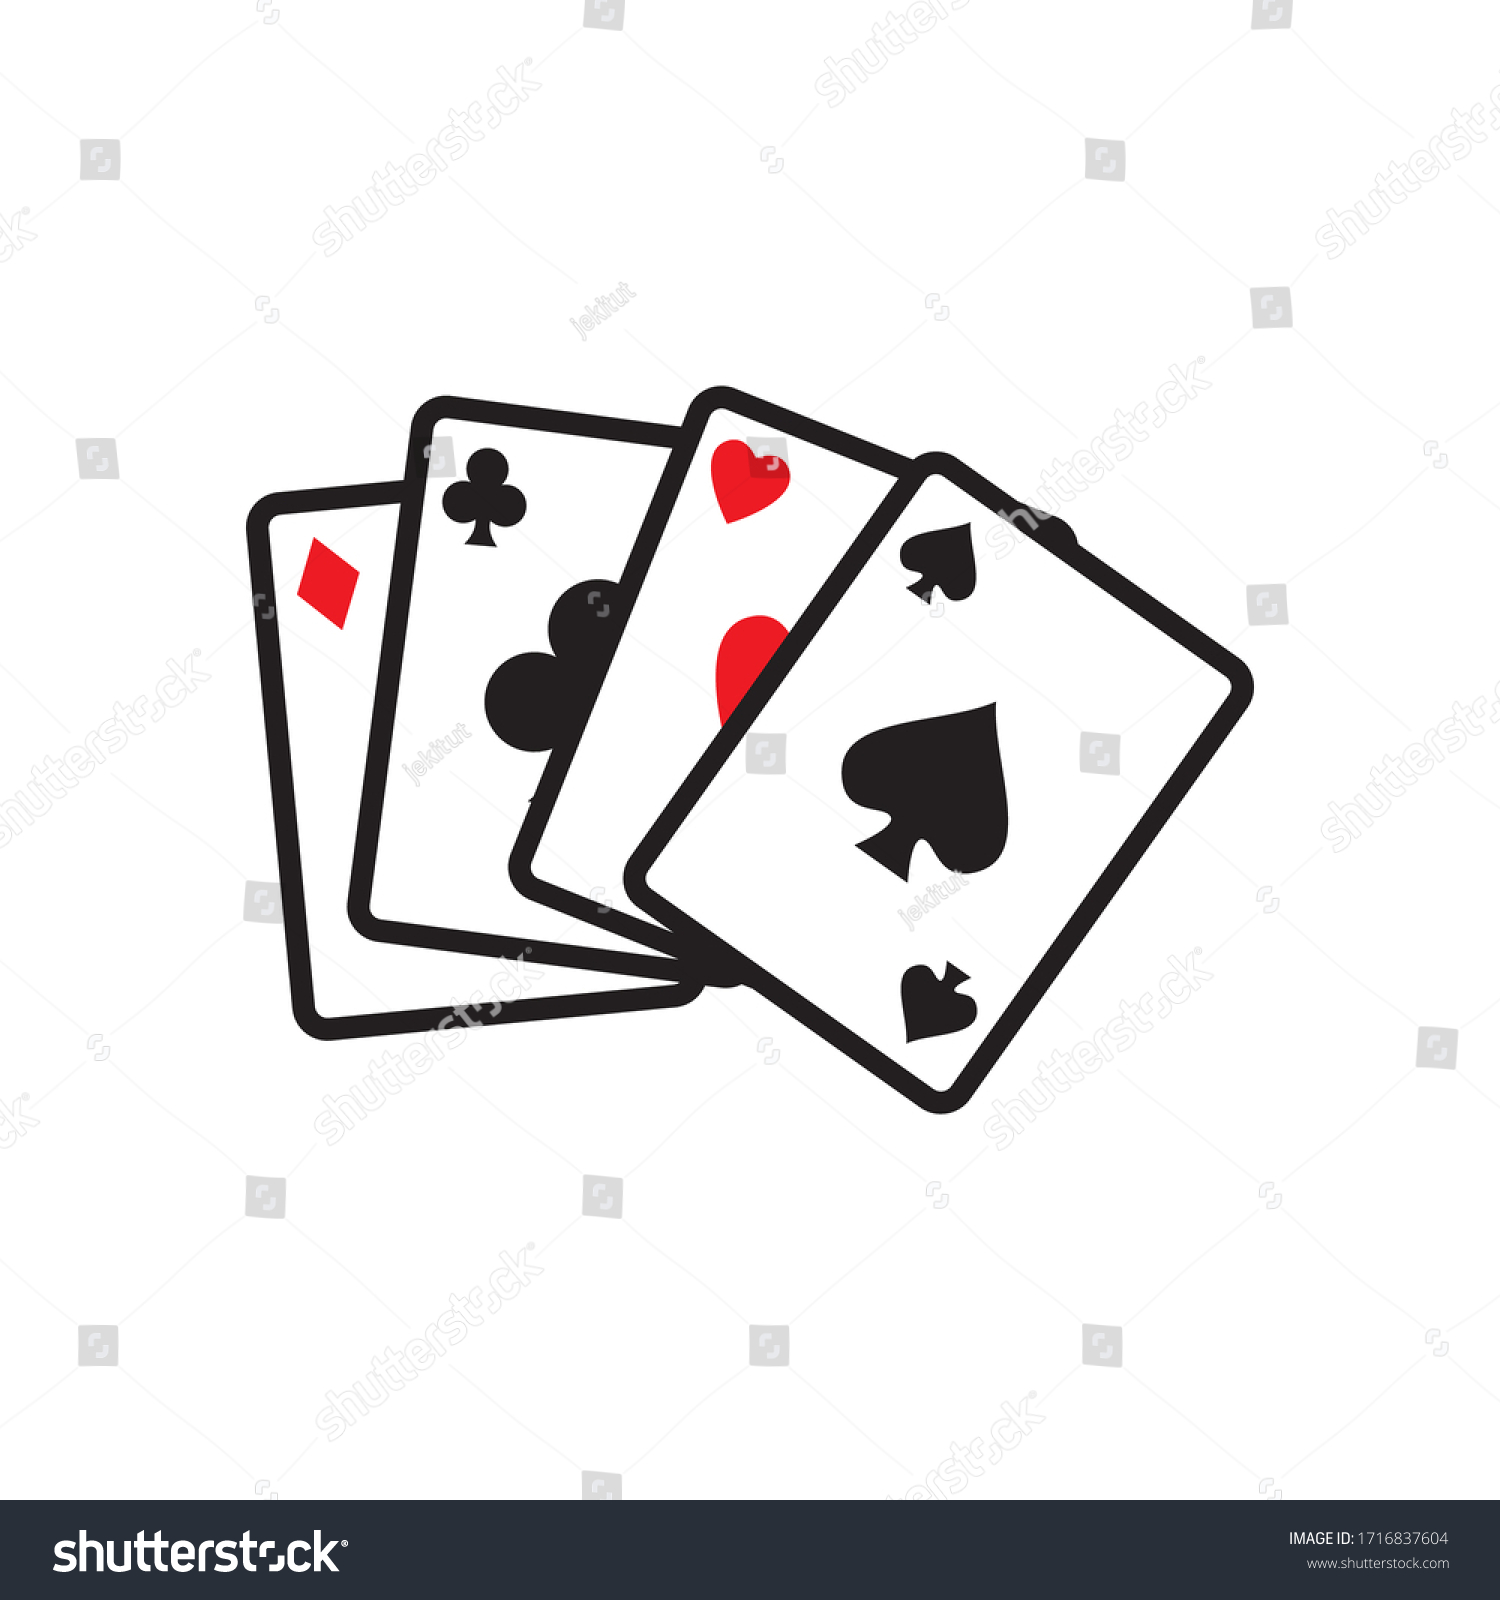 12,435 Poker cards outline Images, Stock Photos & Vectors | Shutterstock